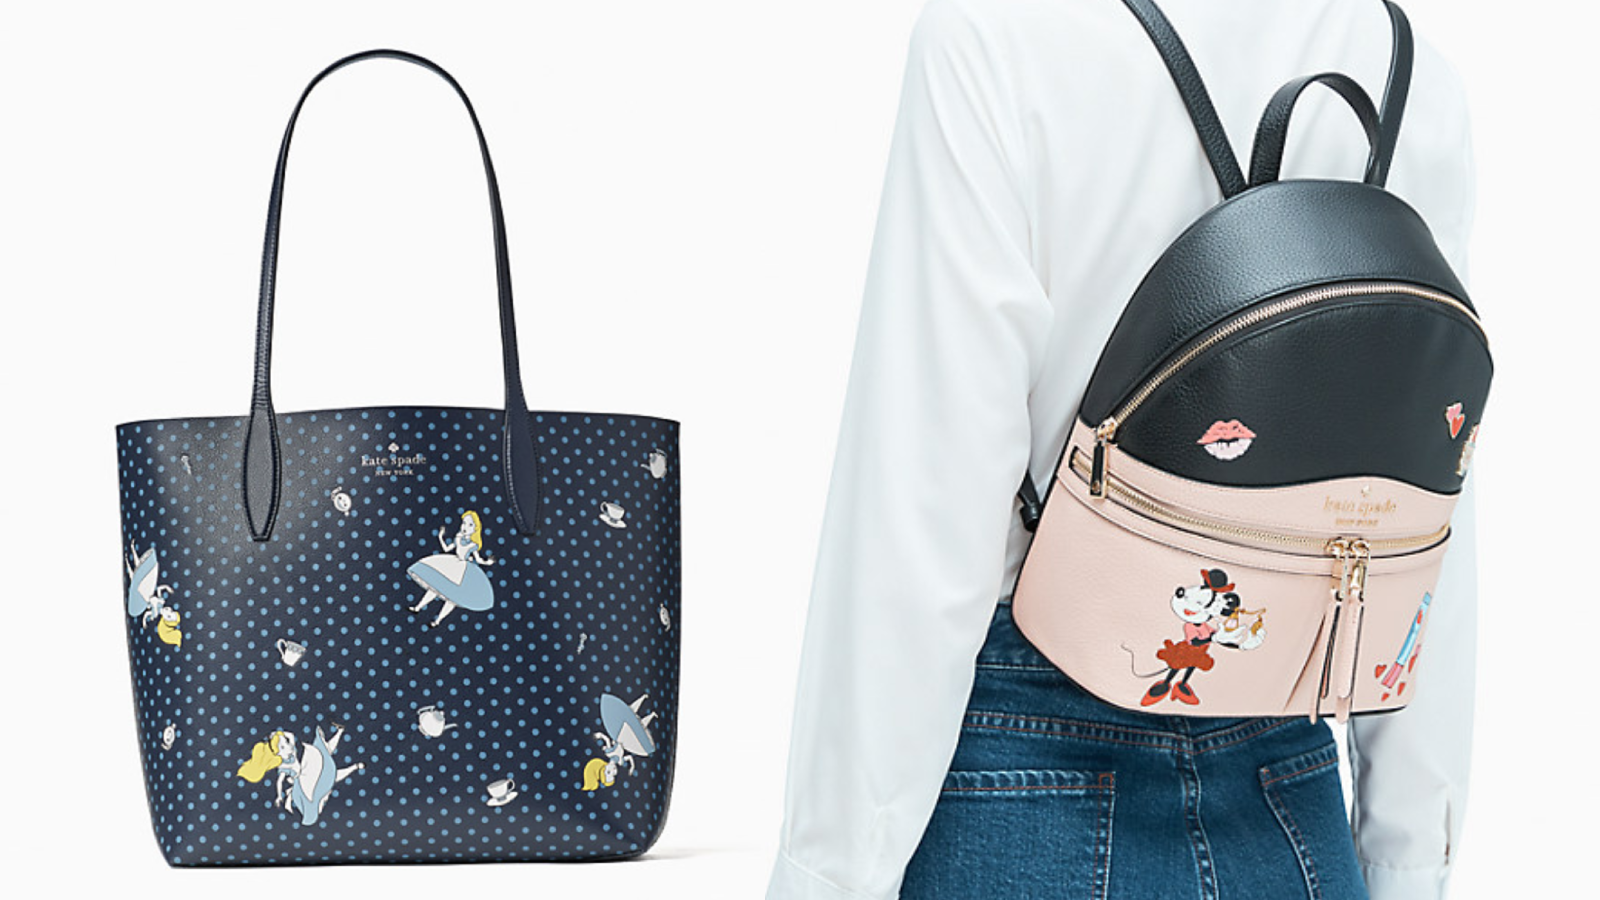 Disney x Kate Spade collection: Where to buy the purses and accessories